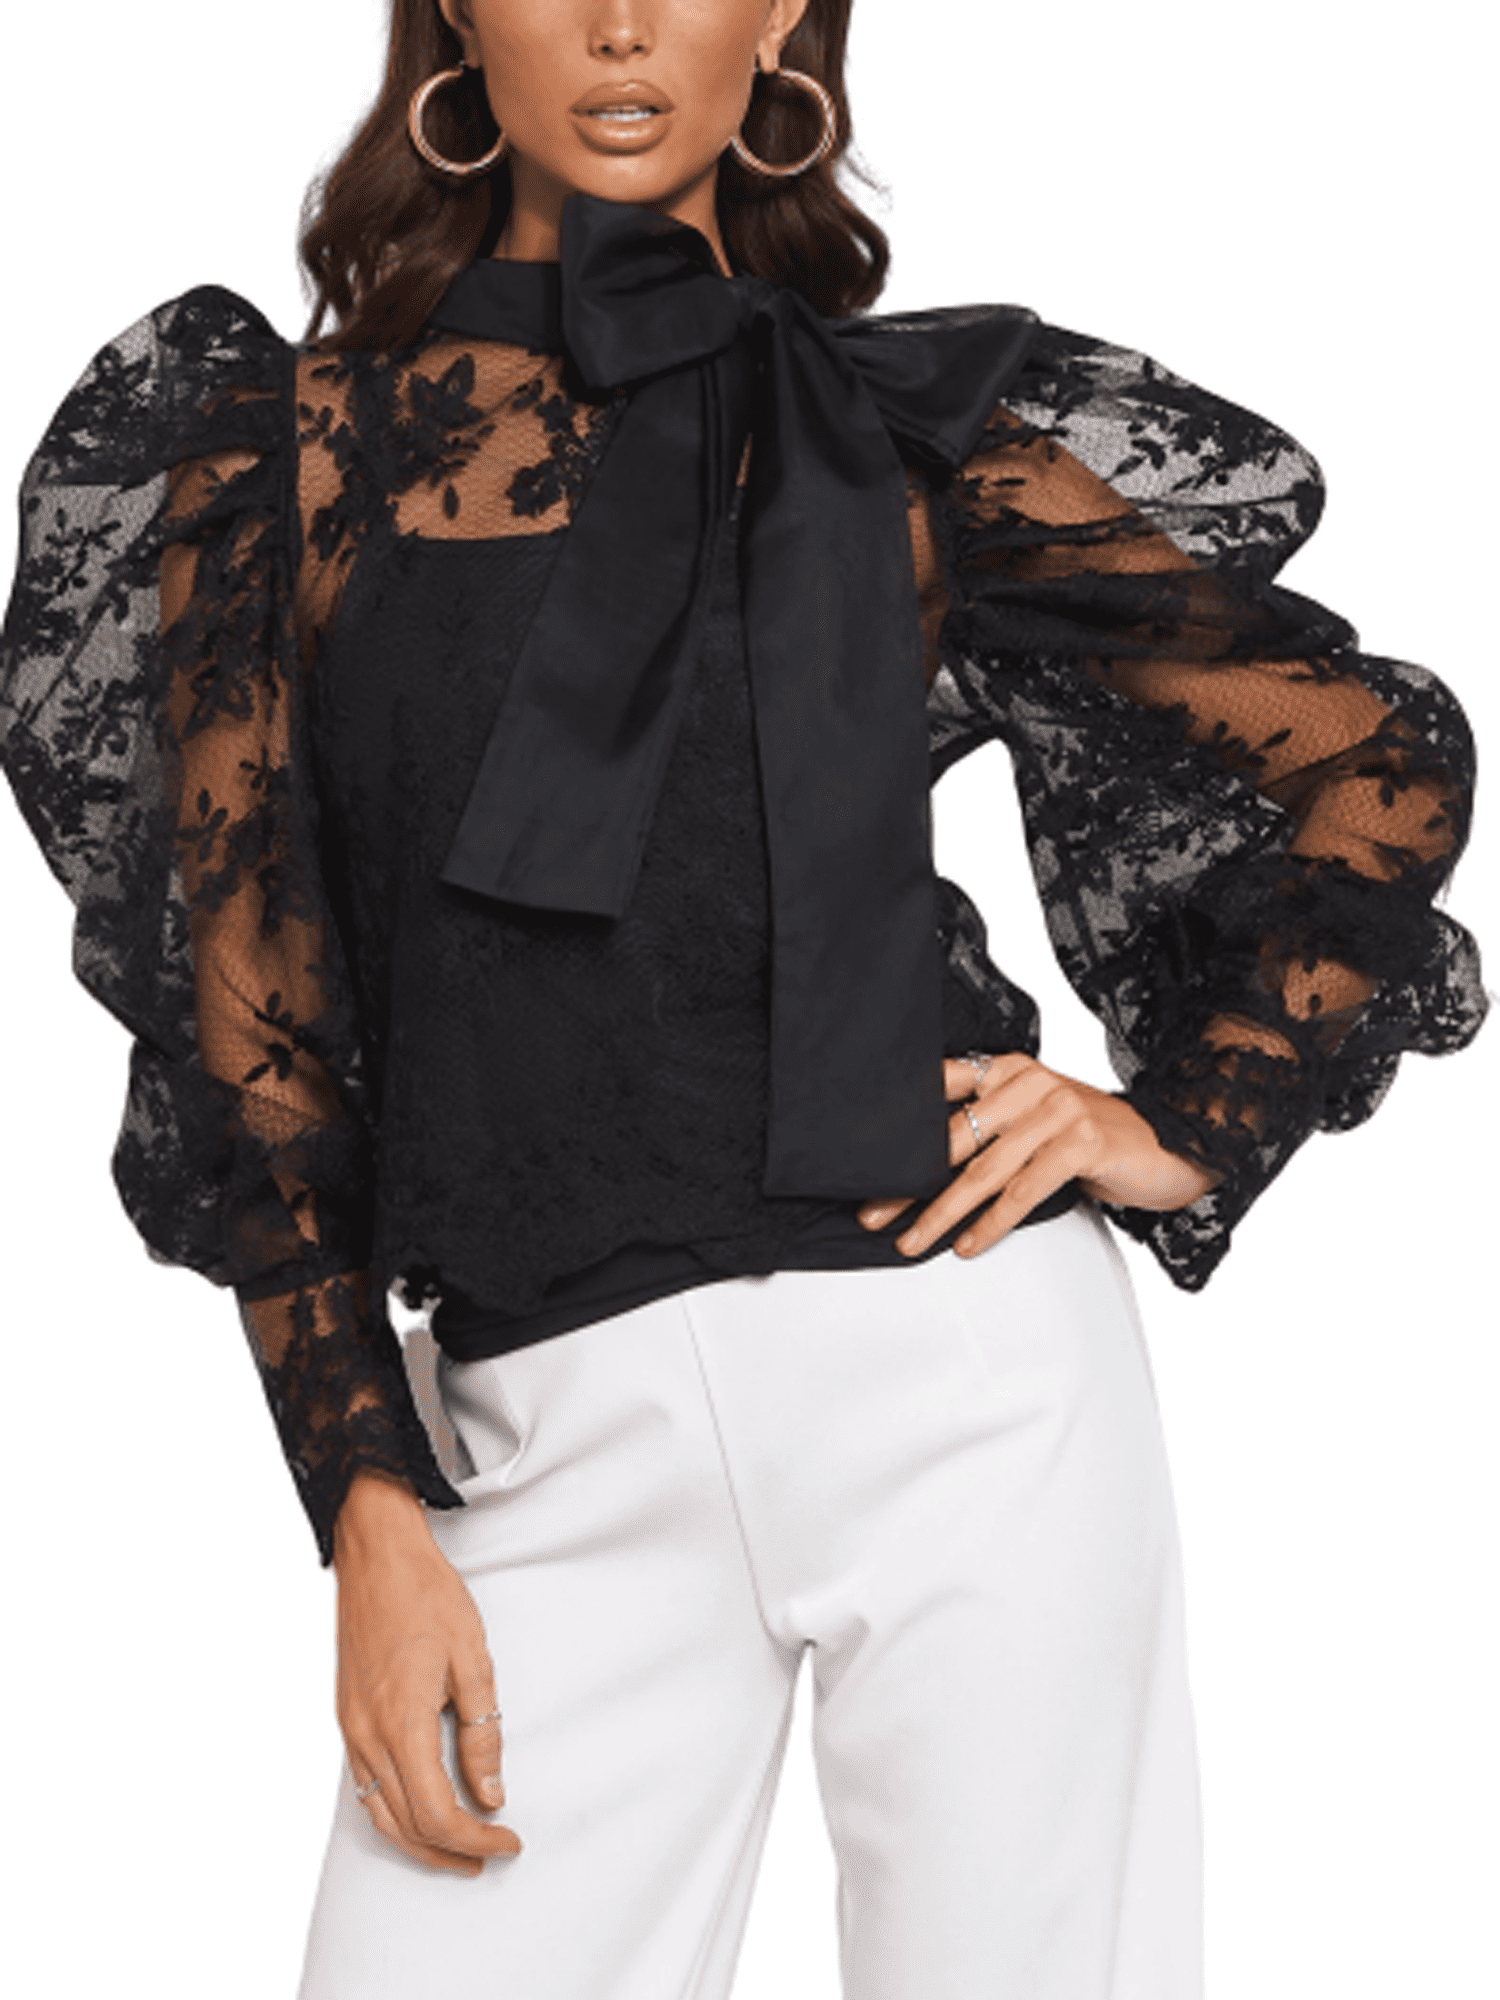 Eyicmarn Women Bow Tie Neck Lace Floral Mesh Sheer See Through Top Long Puff Sleeves Tee Shirt